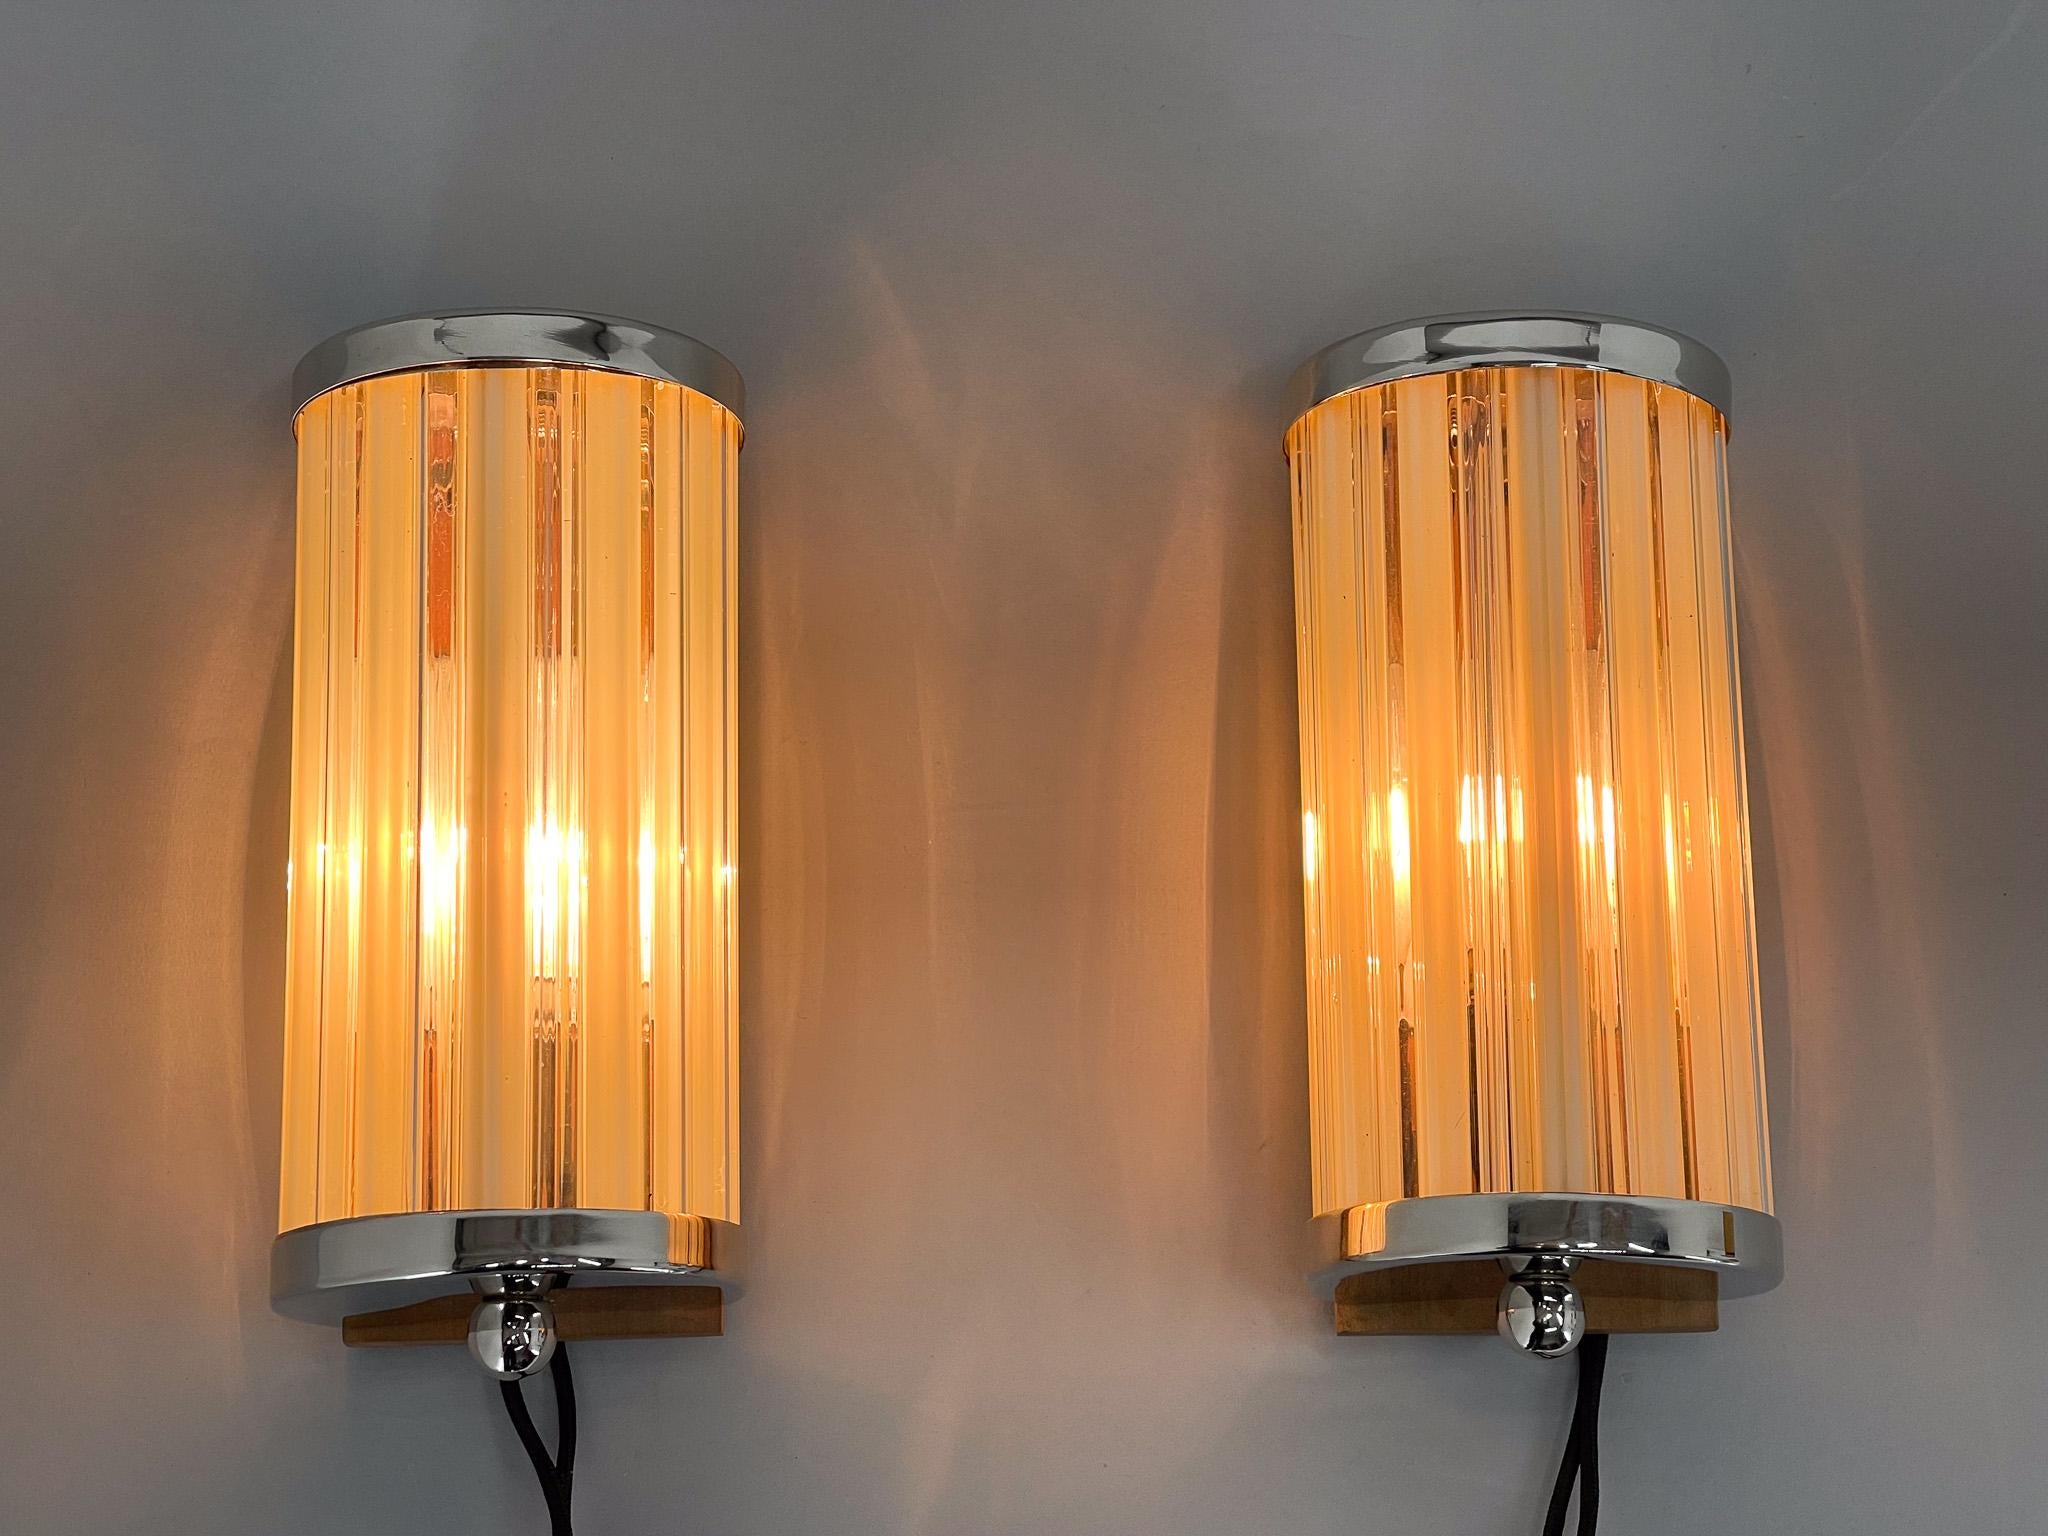 Unique set of two rare wall lights made of glass, chrome and wood. Matching chandelier available. Very good condition (see photo) restored, rewired. 
Bulbs: 2 x E14. 
US wiring compatible.